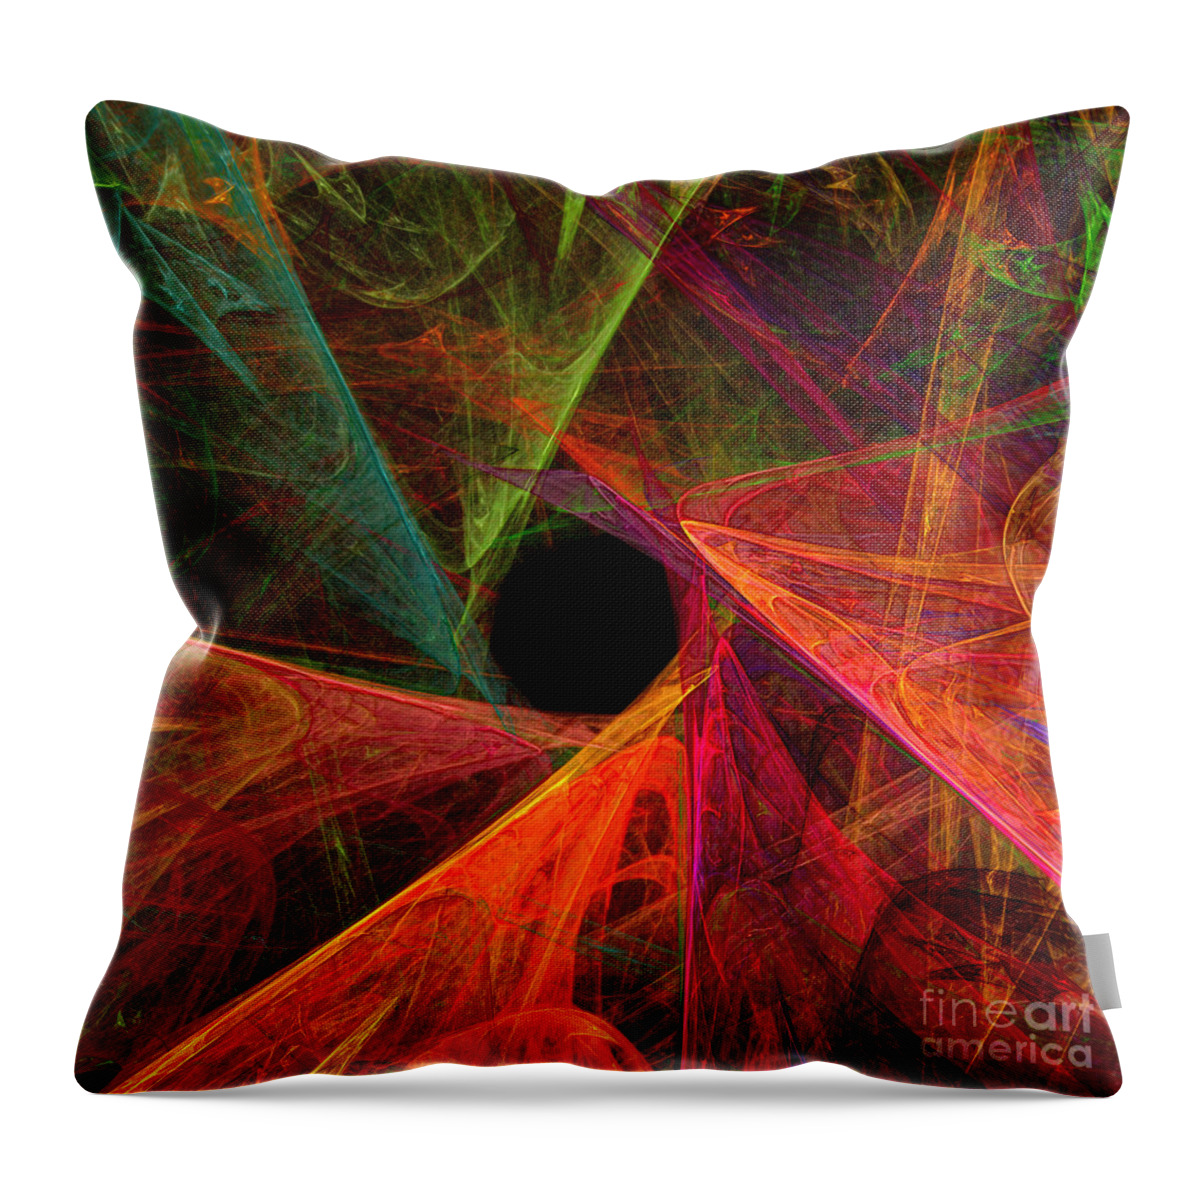 3d Throw Pillow featuring the digital art Wide Eye Color Delight Square by Andee Design